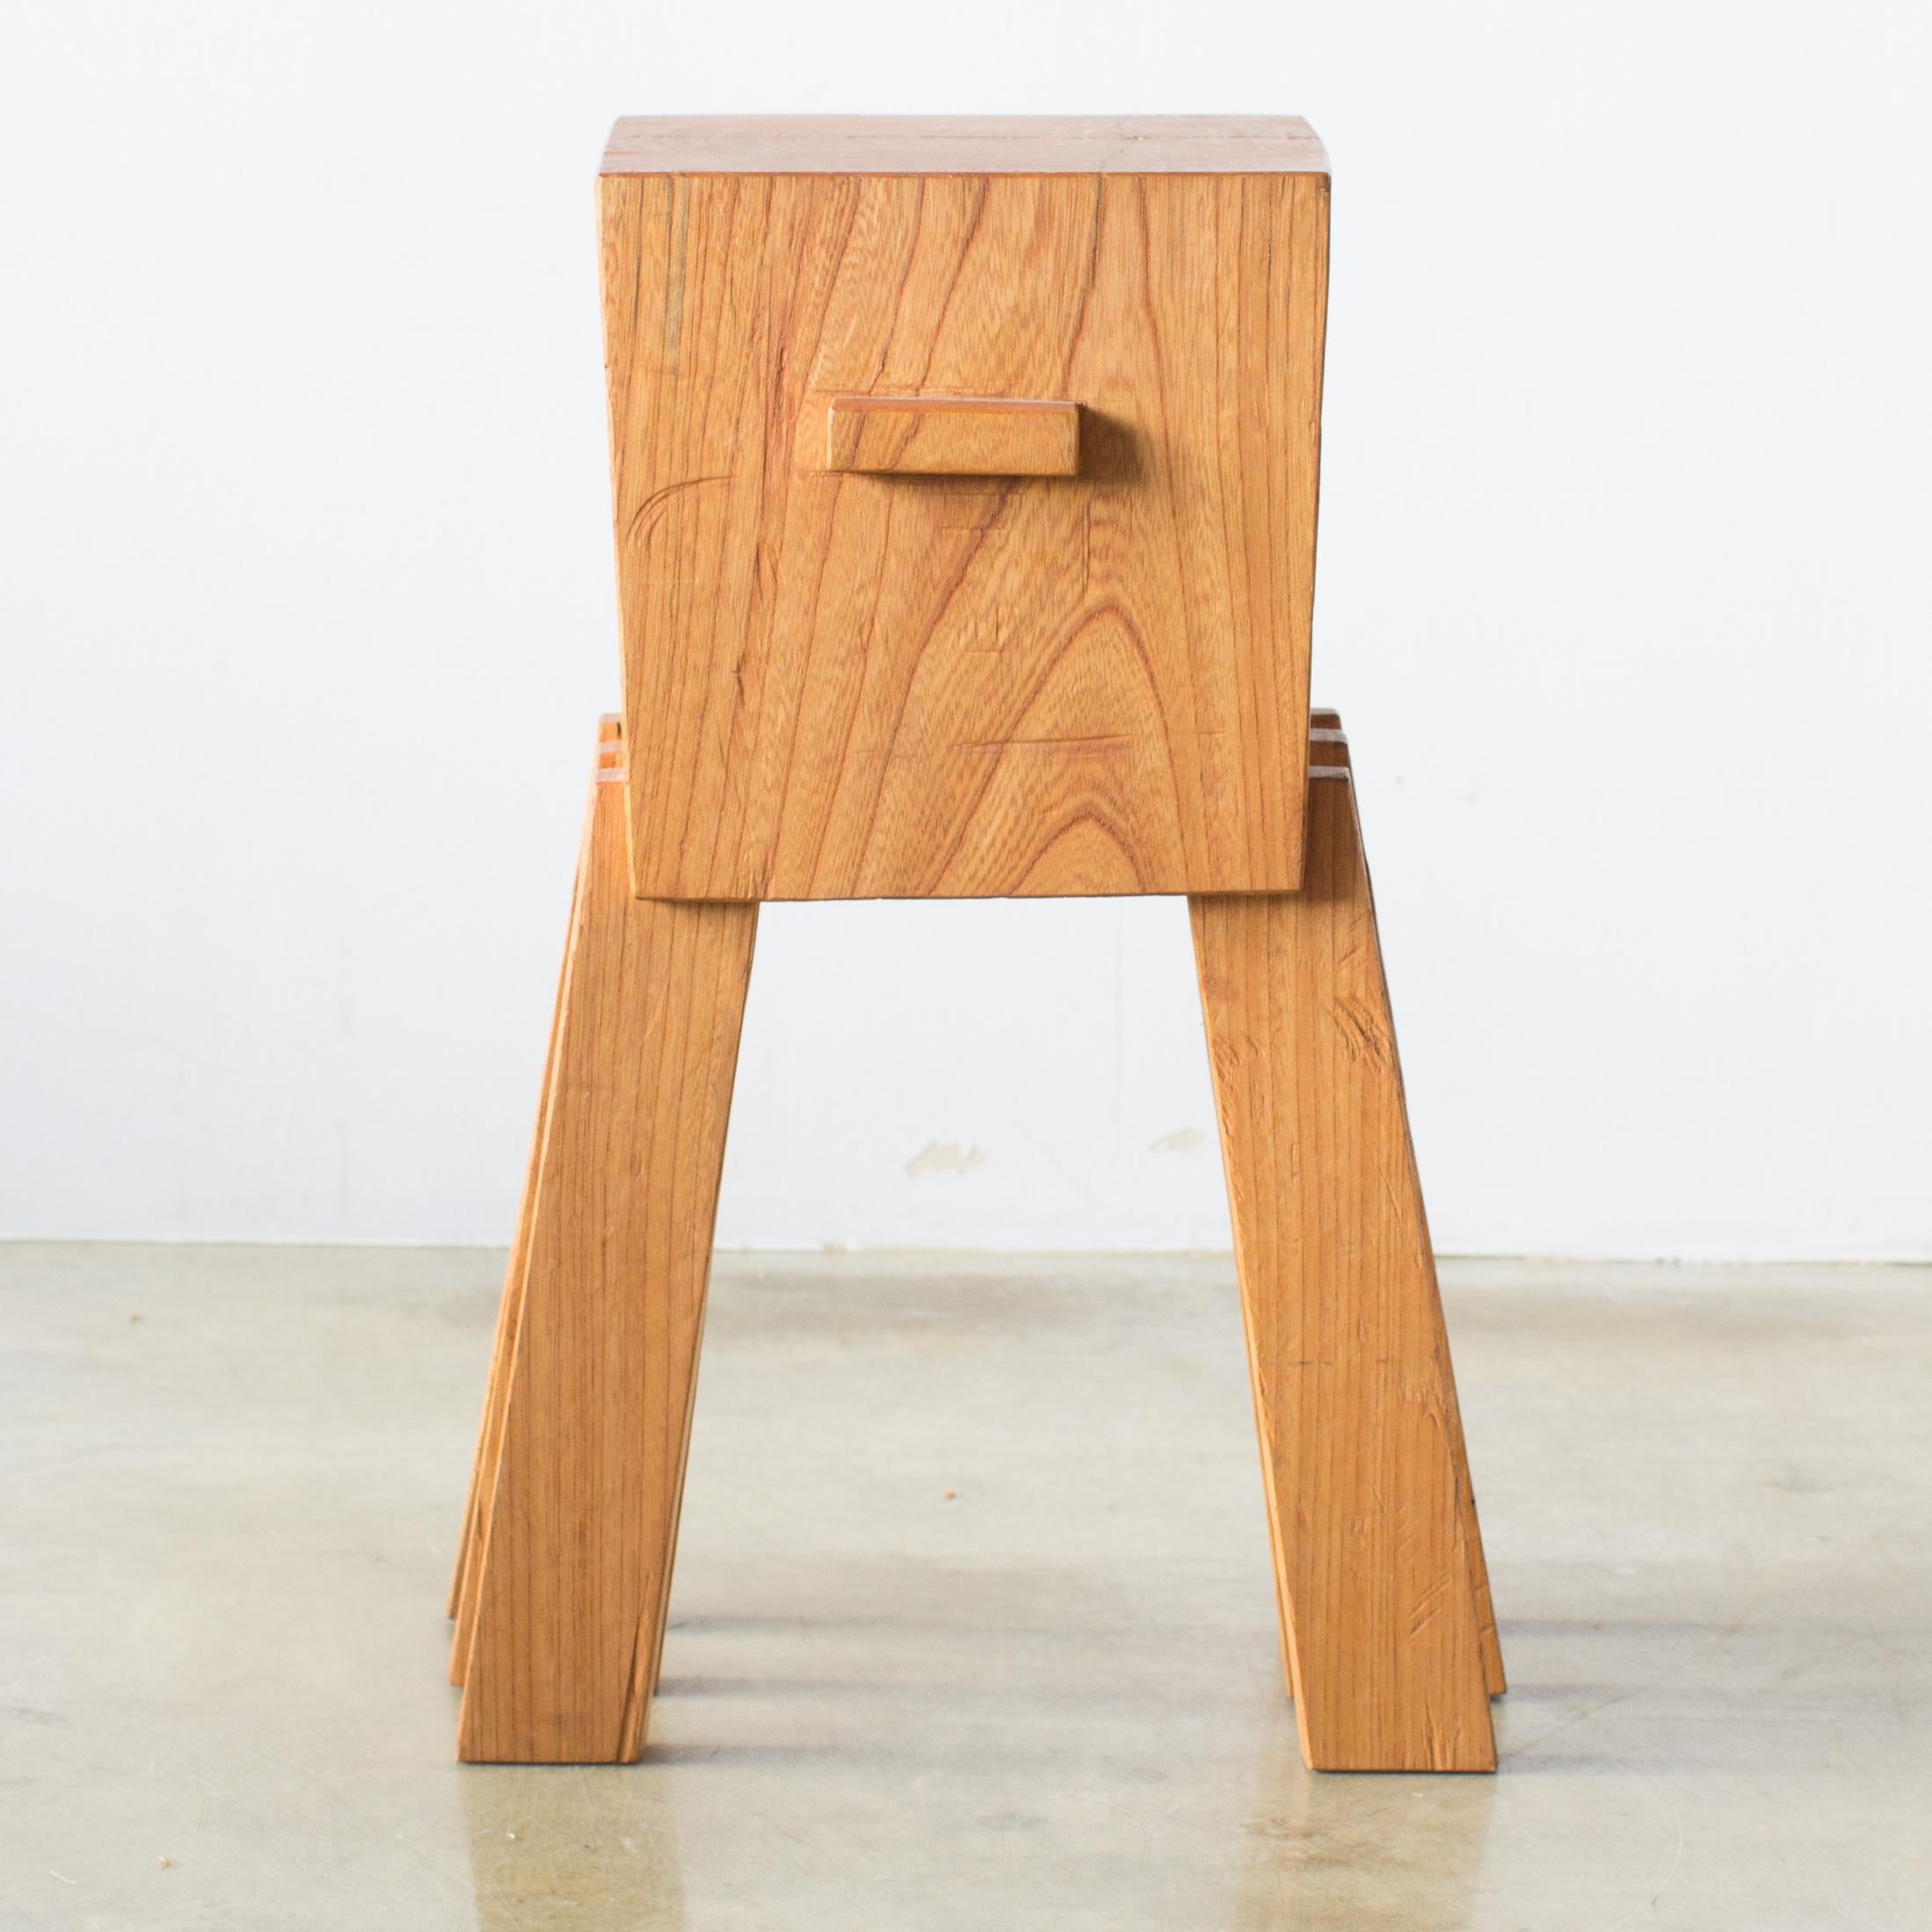 Name: Observation tower
Sculptural stool by Hiroyuki Nishimura and zone carved furniture
Material: zelkova.
This work is carved from log with some kinds of chainsaws.
Most of wood used for Nishimura's works are unable to use anything, these